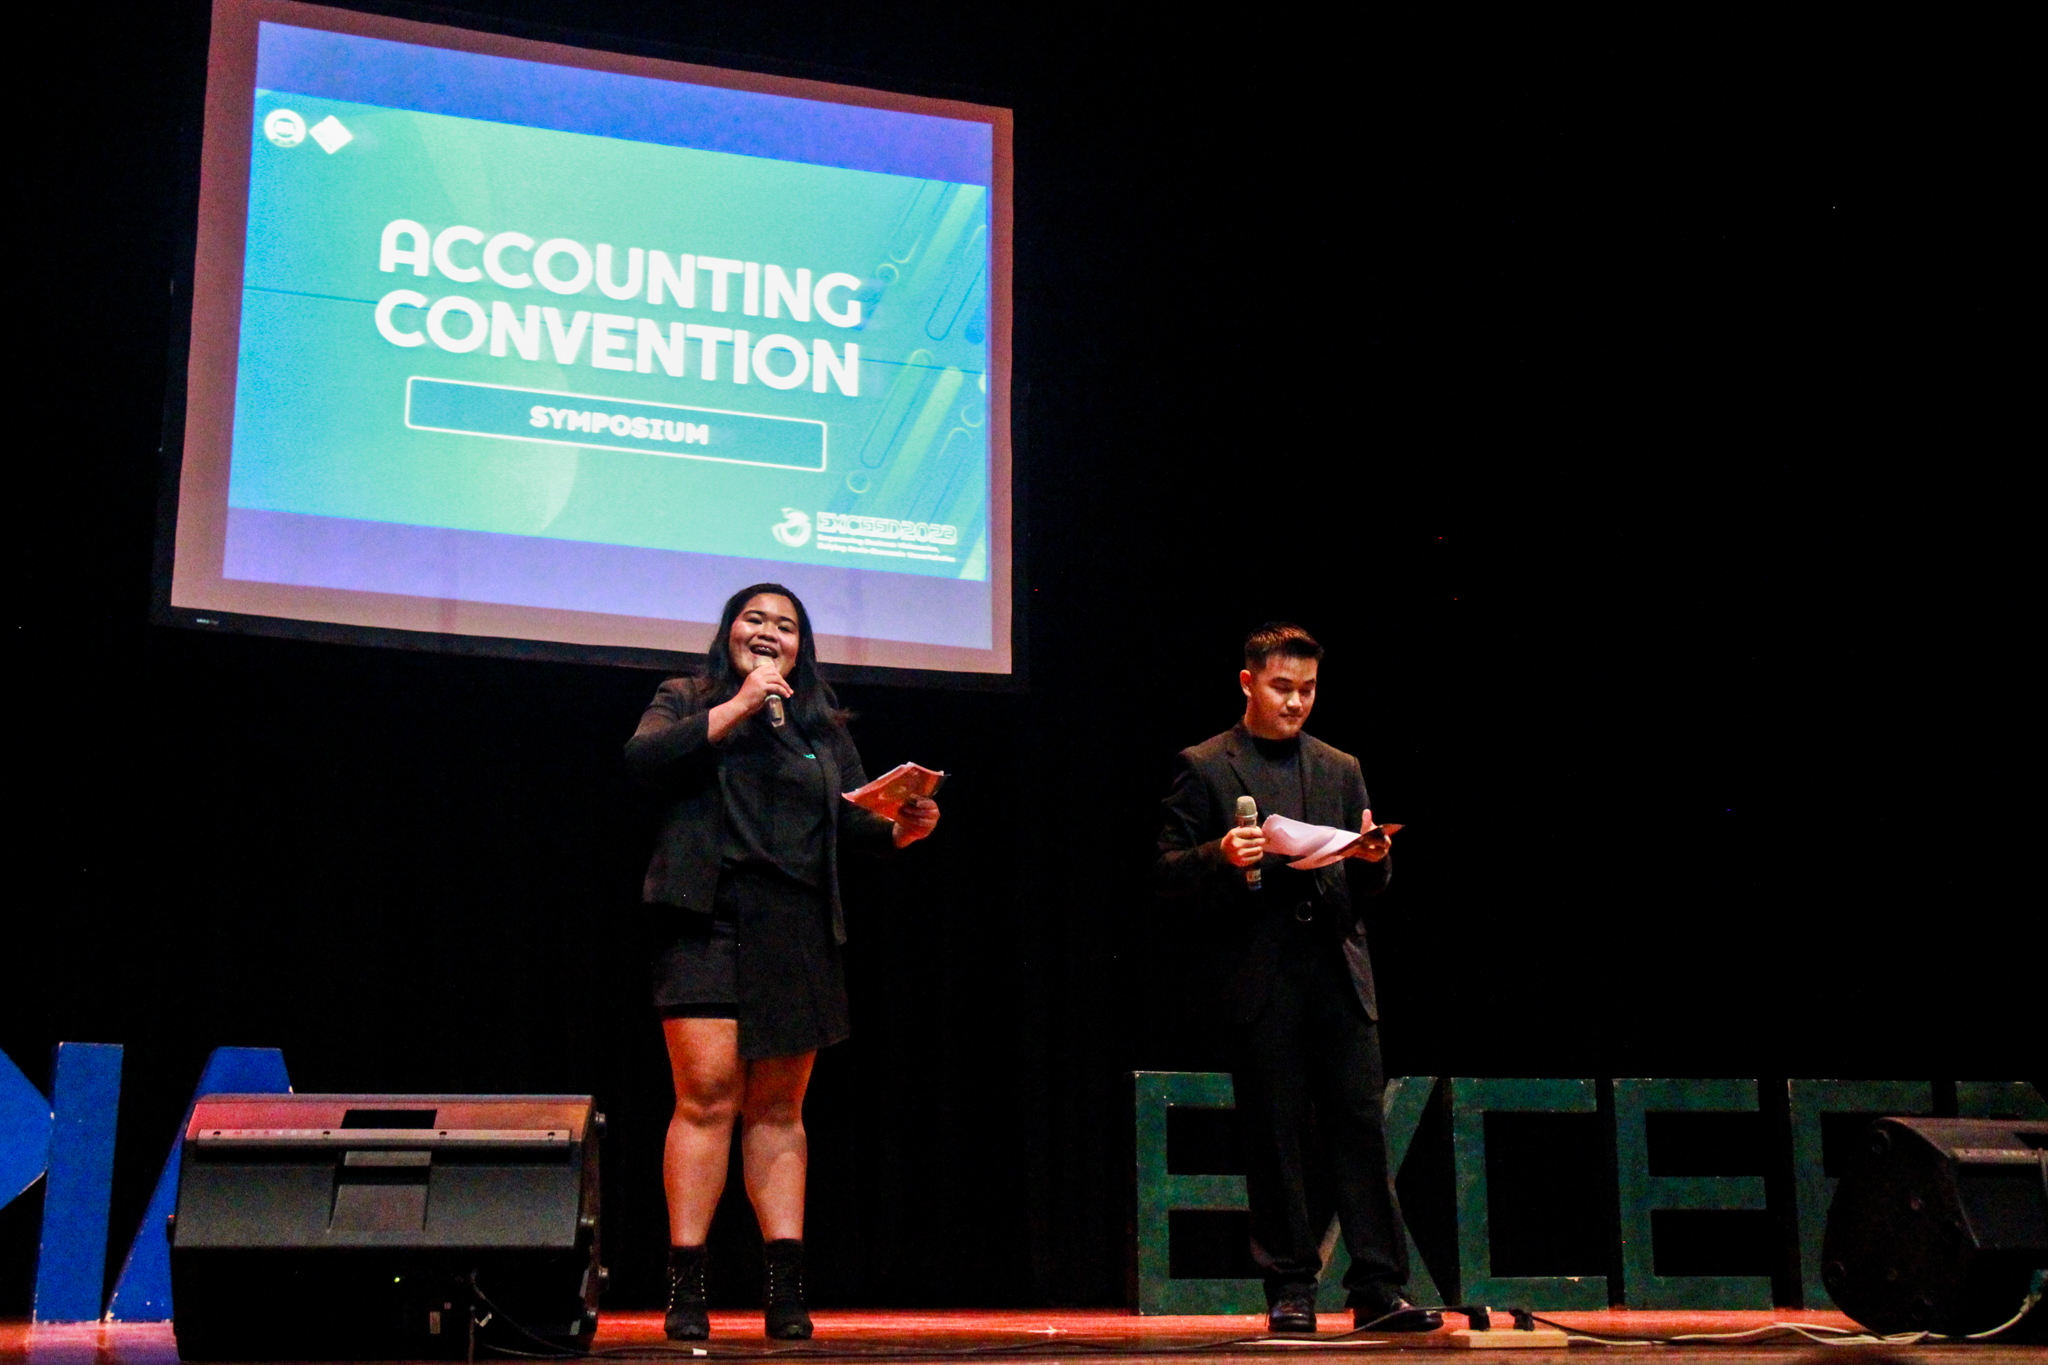 EXCEED gathers accountancy students nationwide for competitions, seminars